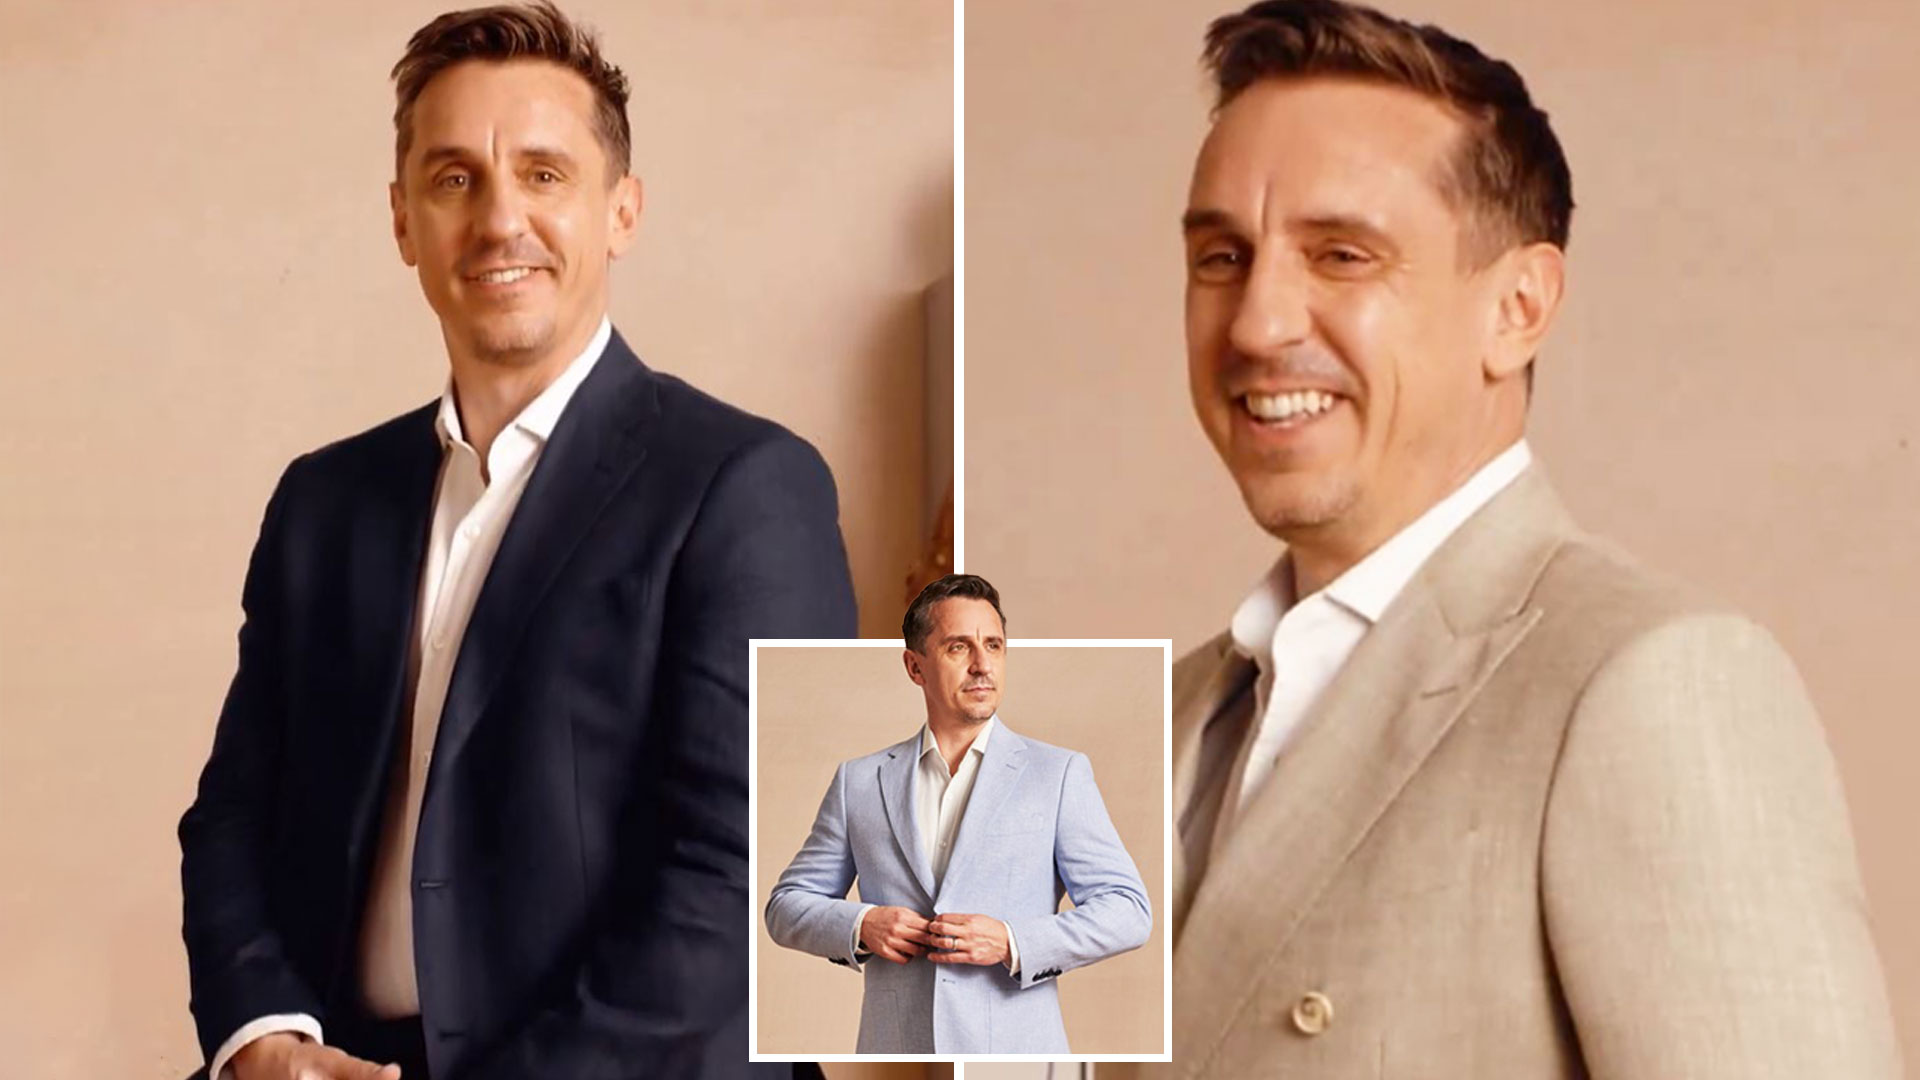 Gary Neville makes latest career change as Man Utd legend tries his hand at modelling [Video]